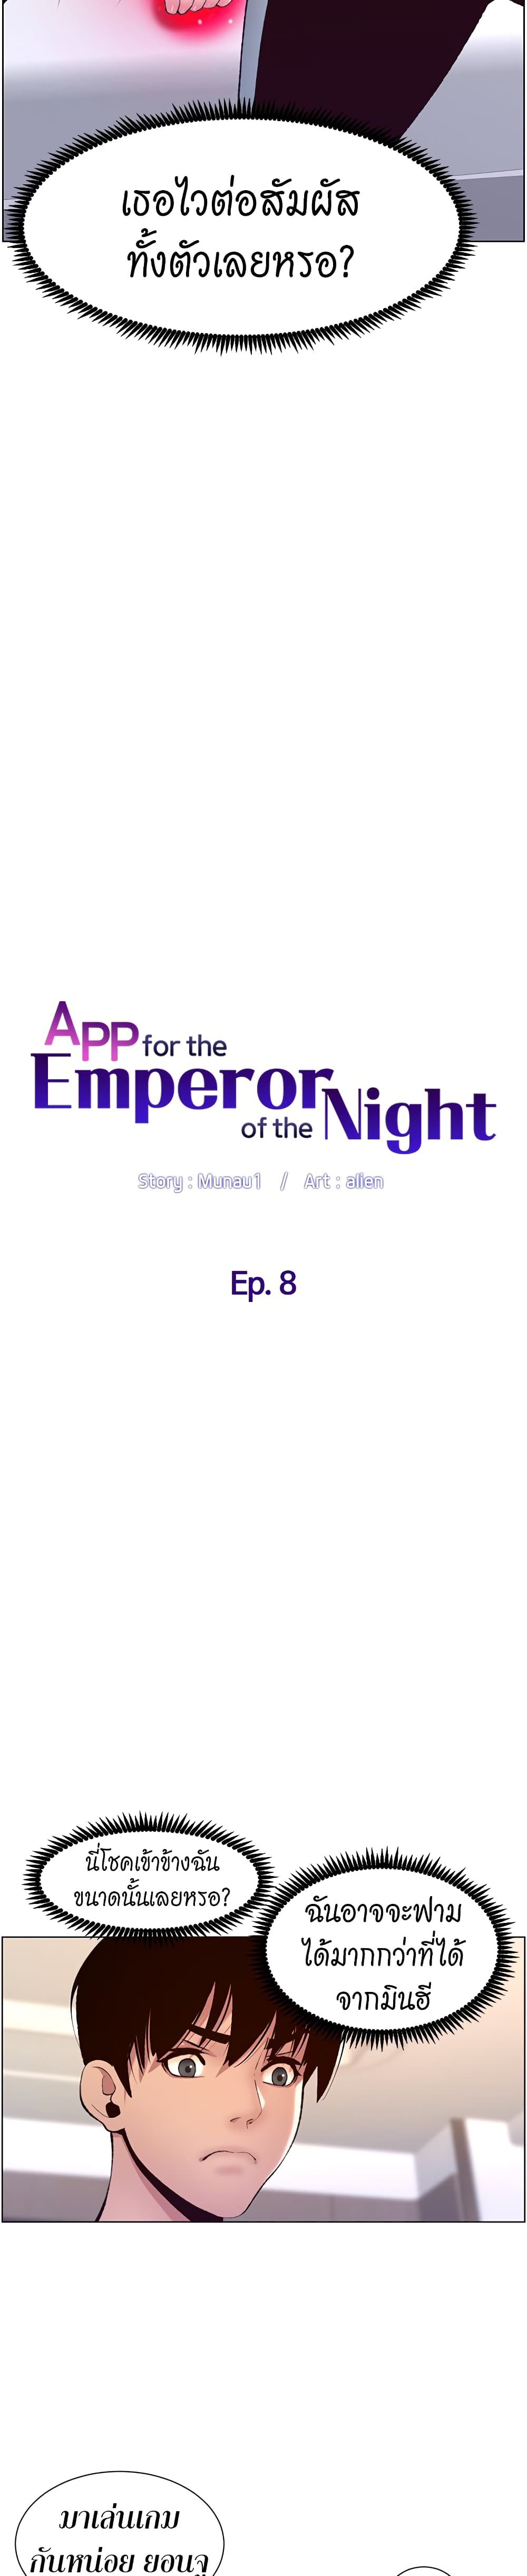 APP for the Emperor of the Night 8-8